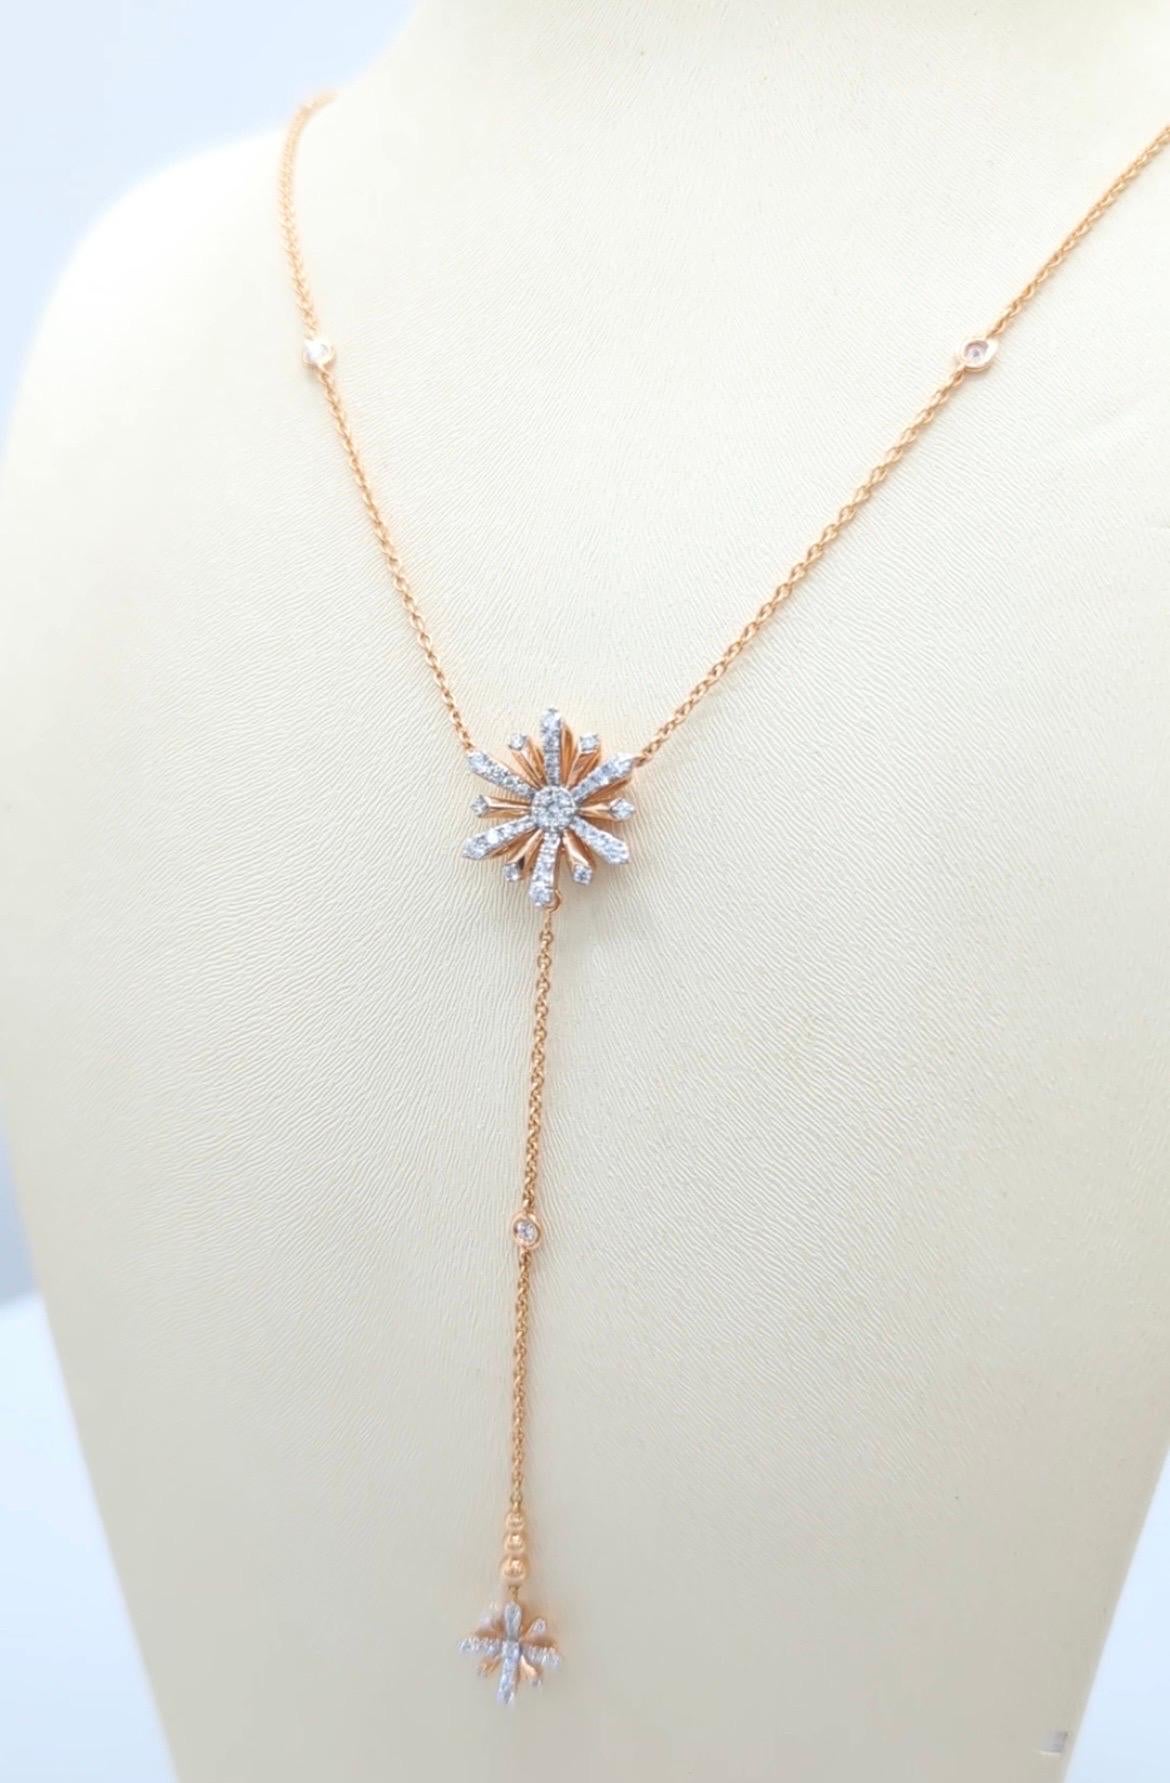 Brilliant Cut Rose Gold and Diamond Edelweiss Sunshine Necklace For Sale